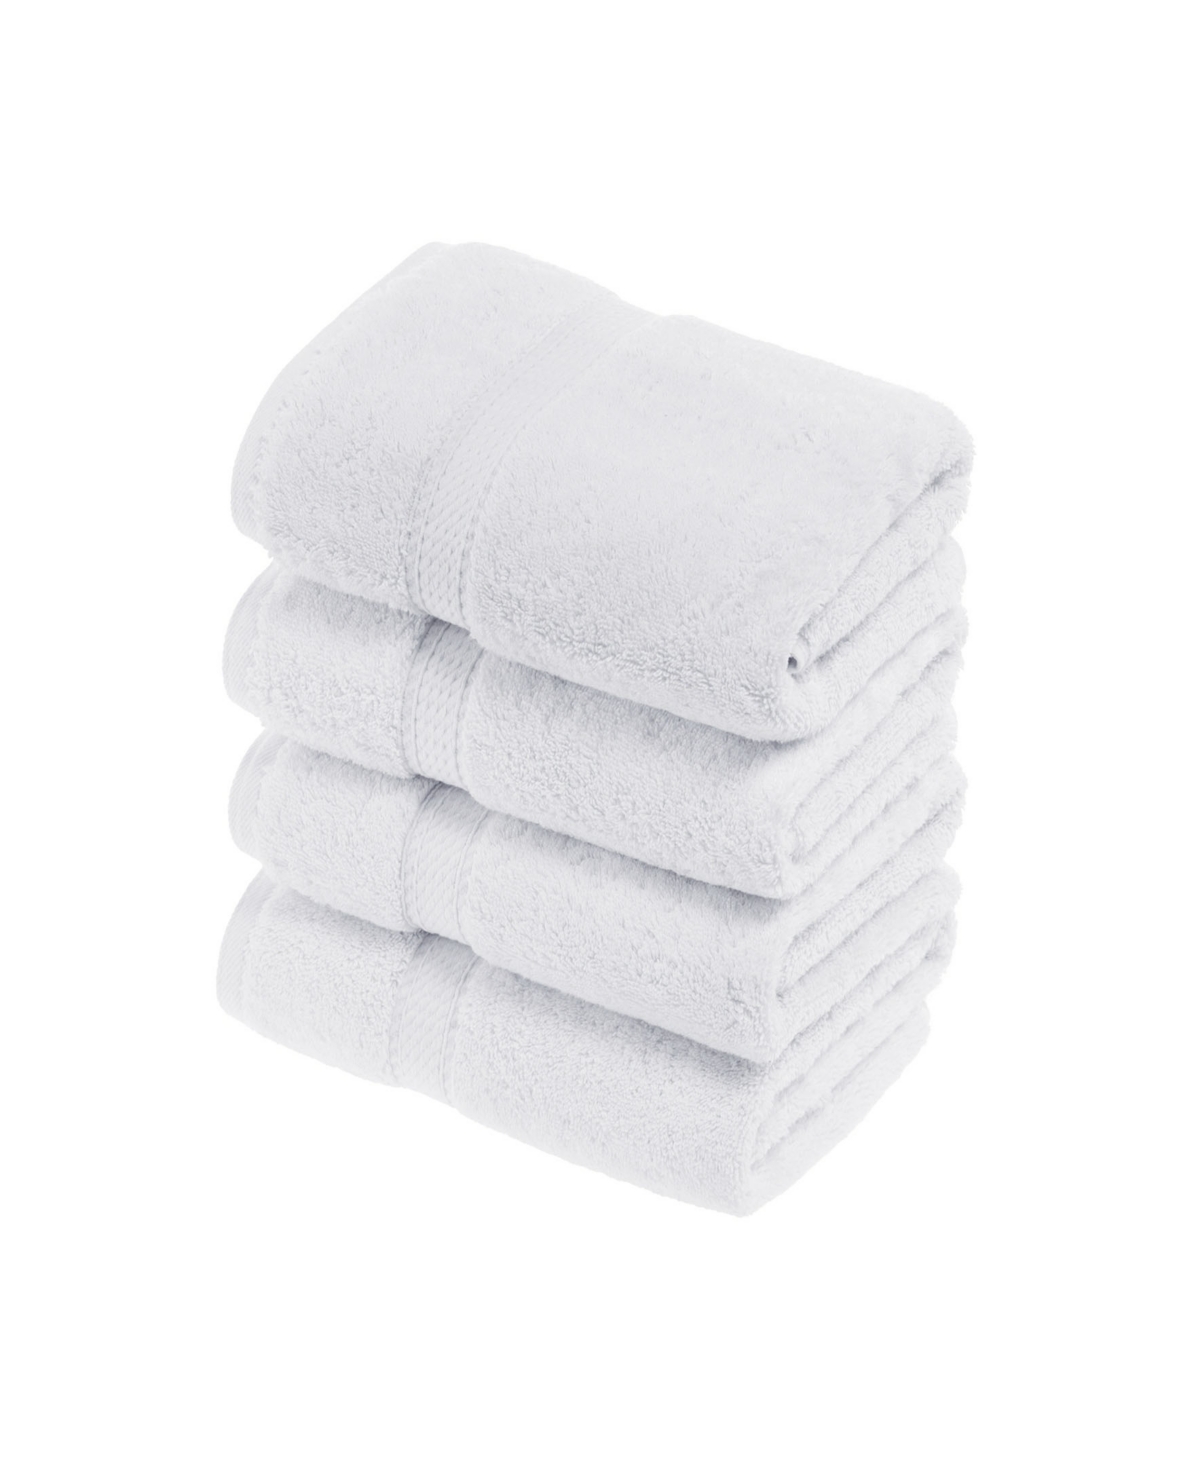 Superior Highly Absorbent 4 Piece Egyptian Cotton Ultra Plush Solid Hand Towel Set Bedding In White